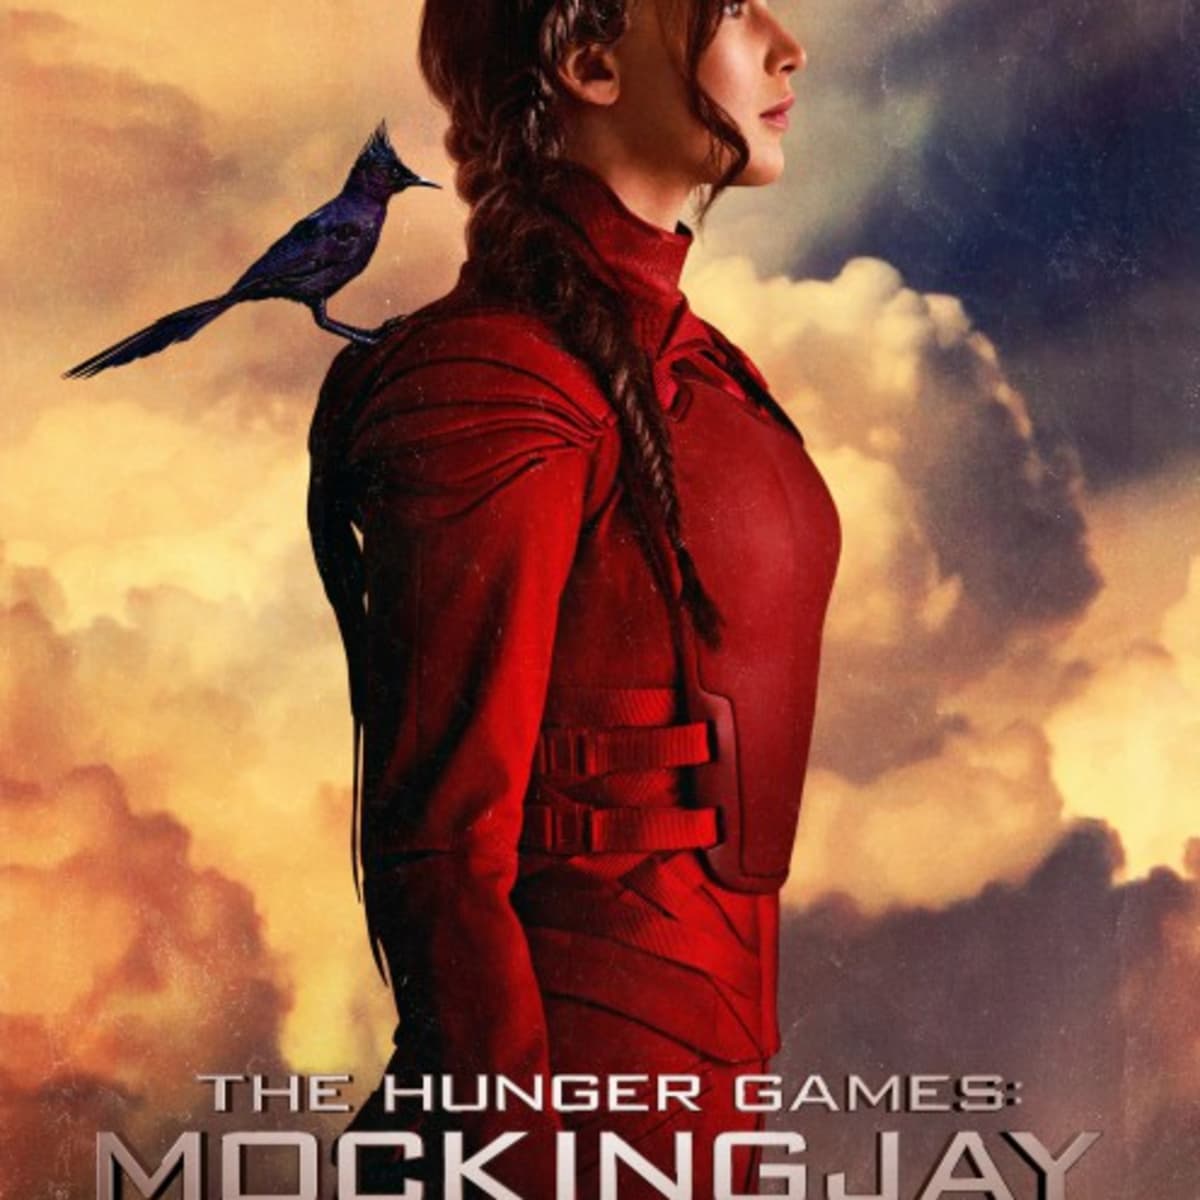 The Hunger Games: Mockingjay Part 2 (2015), English Voice Over Wikia